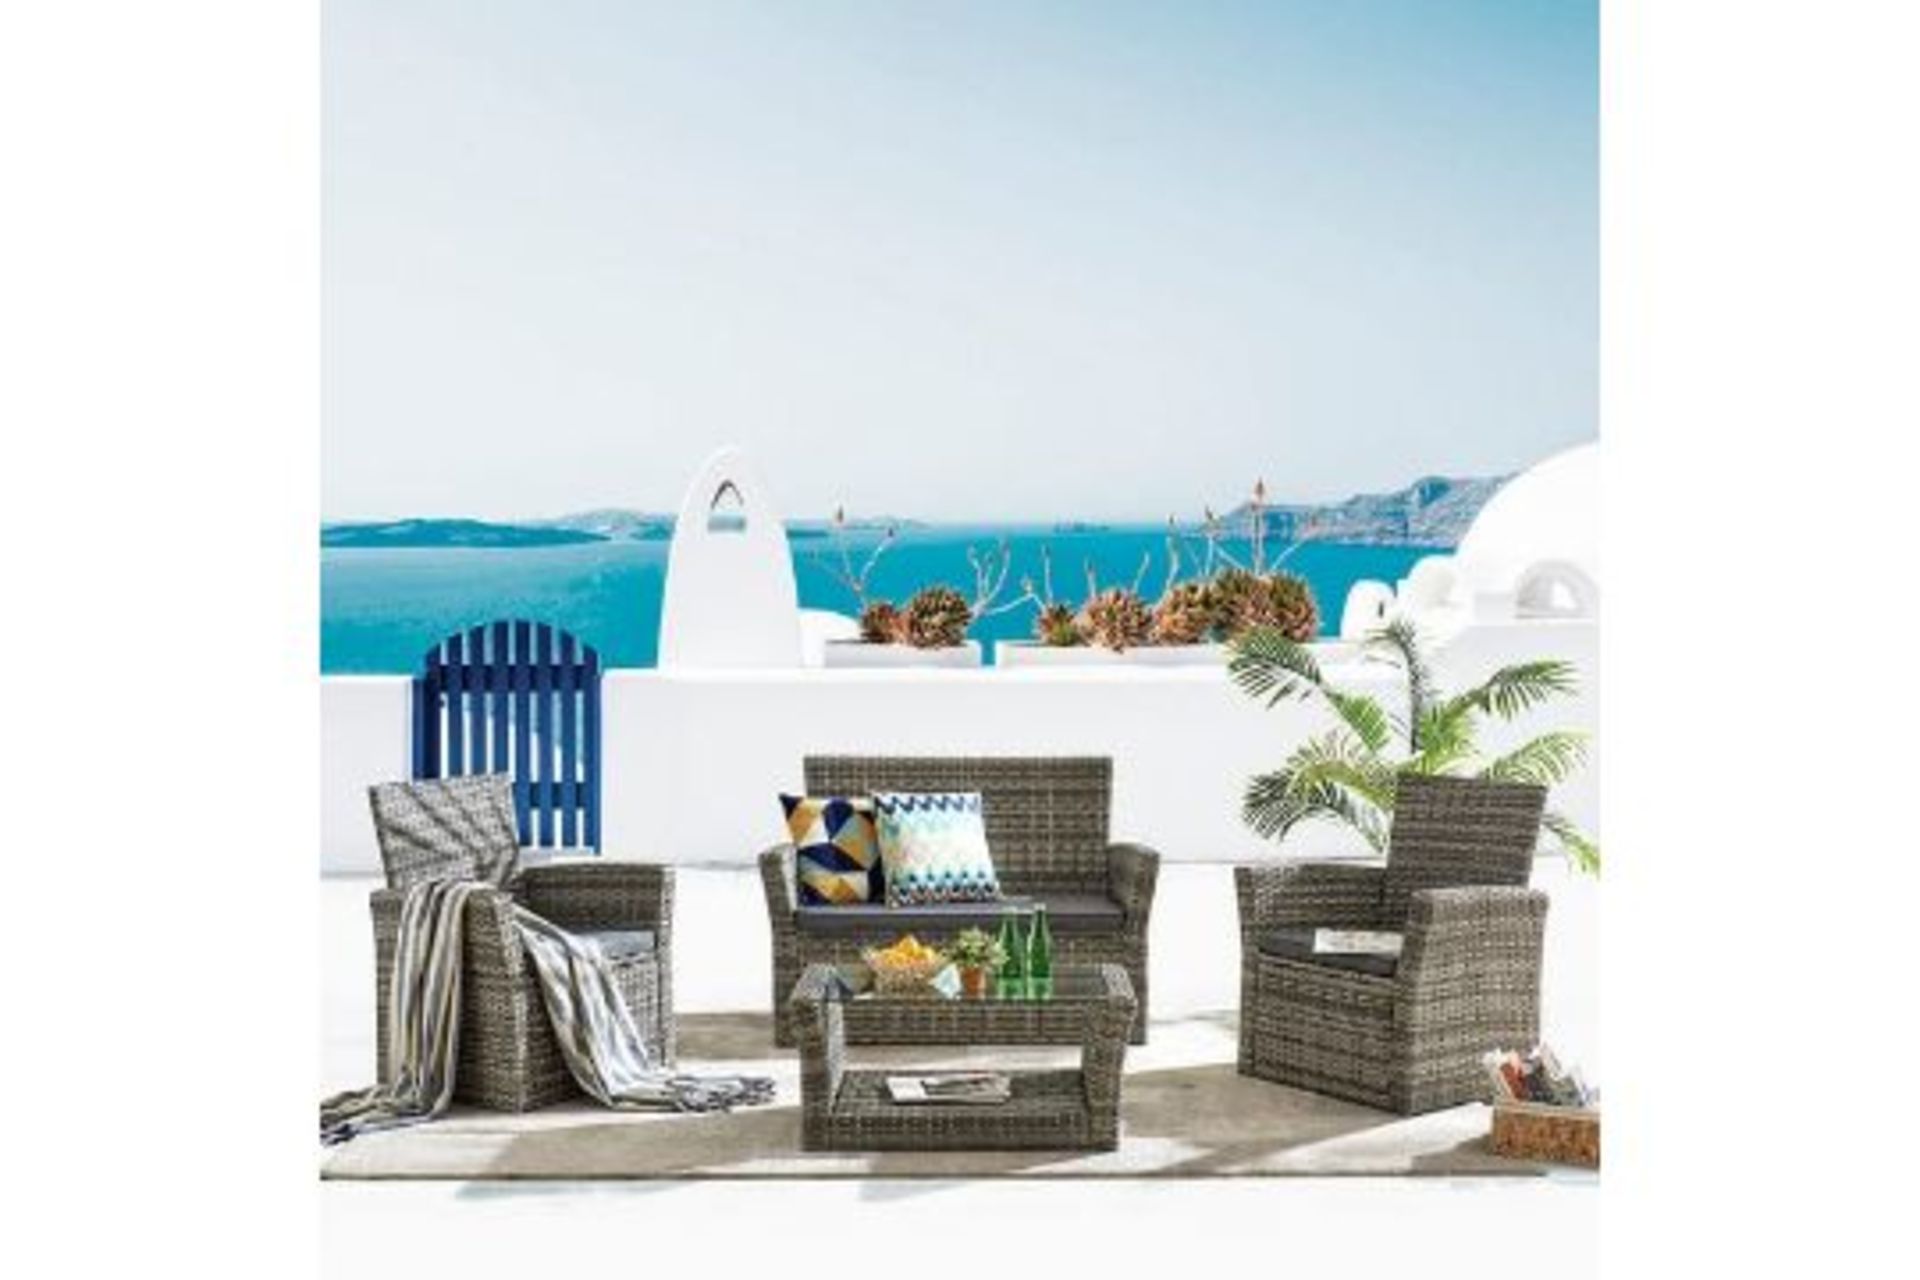 COMMERCIAL LOT 4 X New Boxed Corfo 4 Seater Garden Furniture Set in Grey. The 4-piece garden